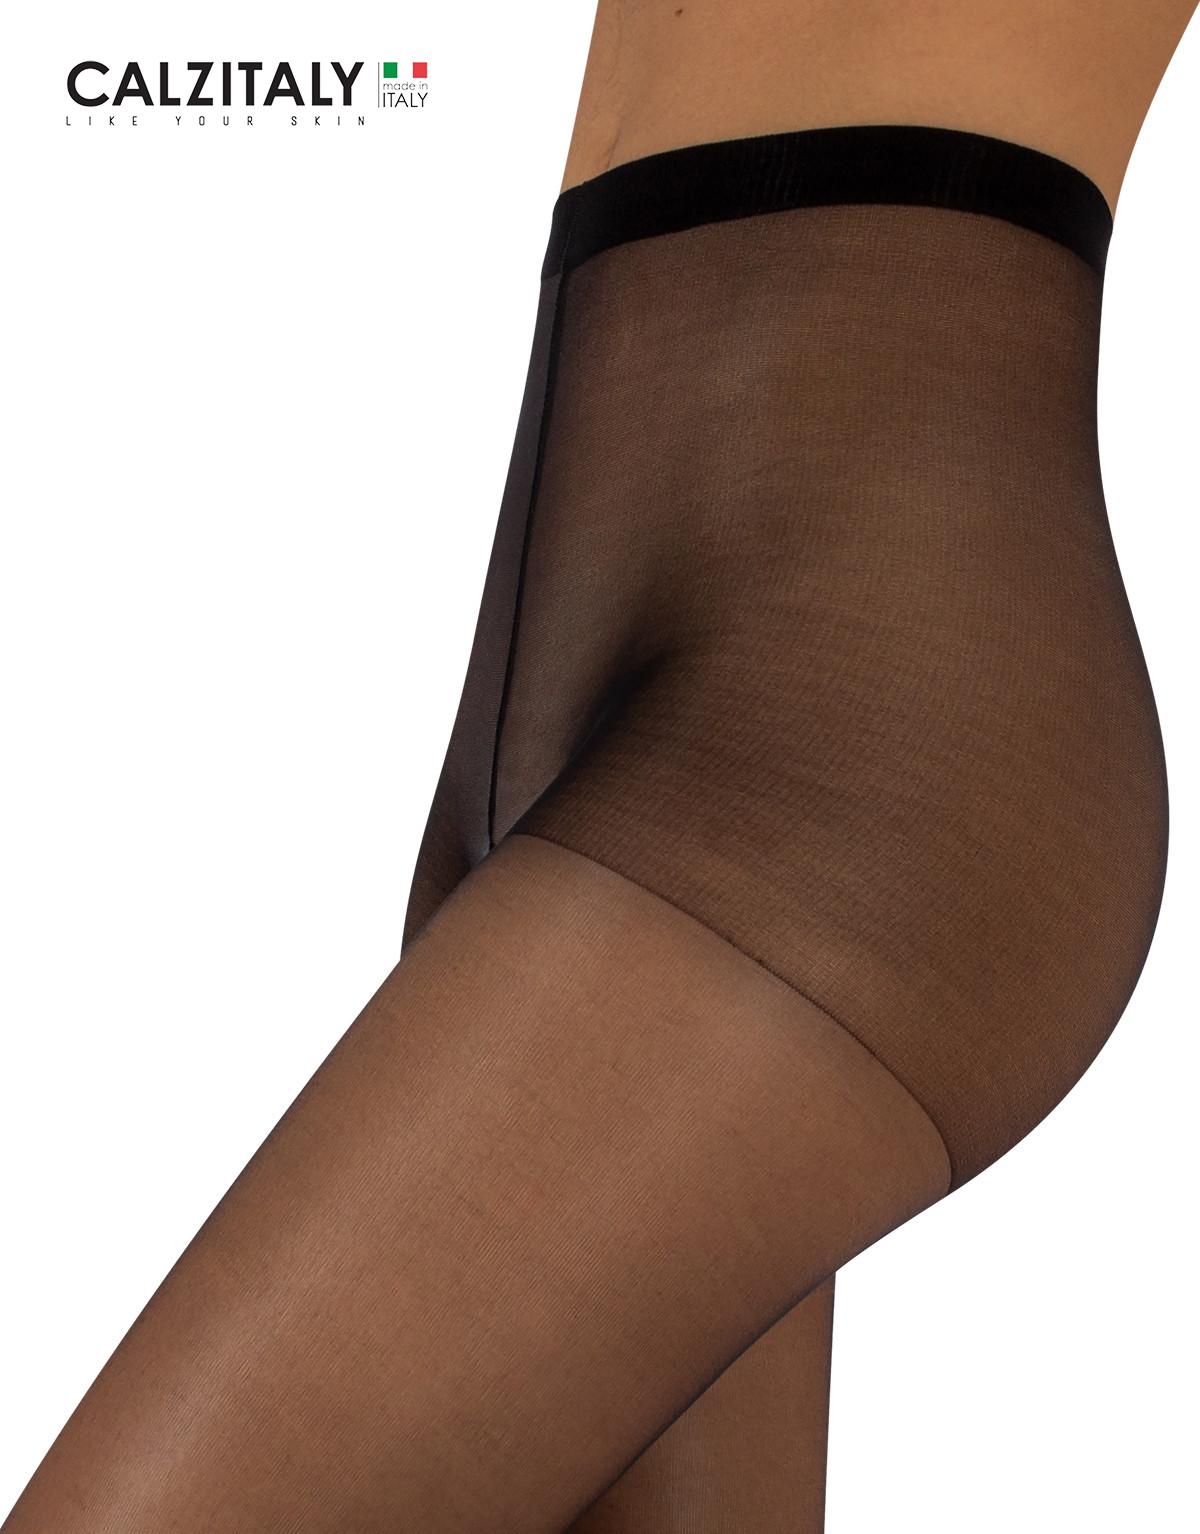 Calzitaly Sheer Tights with Cooling Effect - 7 DEN